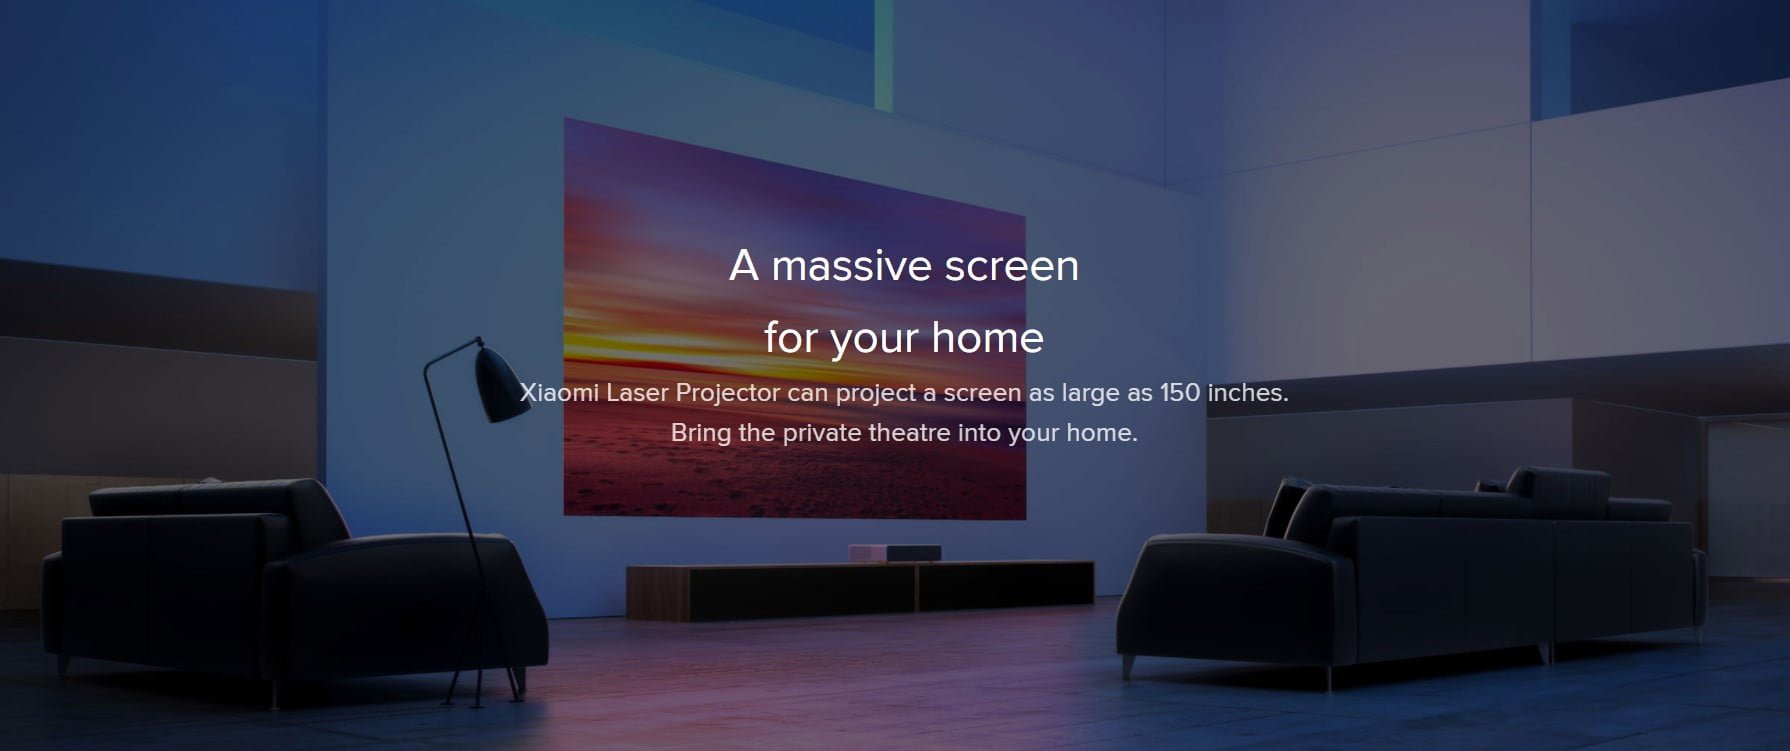 Screenshot 2022 03 30 173126 Xiaomi &Lt;H1&Gt;Mi 4K Laser Projector 150''&Lt;/H1&Gt; Https://Www.youtube.com/Watch?V=Vhplxv8K5Va This Is The World'S First Ultra-Short-Throw Projector With Advanced Laser Display (Alpd) Technology, Which Delivers Up To 150 Inches Of 4K Quality Images From A Distance Of 50 Centimeters, With 1600 Lumens And 3000:1 Contrast Quality, And Product Life Up To 25,000 Hours. To Achieve User-Friendly Design Goals, The High-Tech Product Uses A Compact, Minimalist &Quot;Box&Quot; Design Language, And Carefully Maintains Consistency Between The Host Style And The Bluetooth Remote Control Design. Control The Host From Any Corner Of The Room. Voice Assistant Quickly Find Programs And Other Interactive Ways For The User To Bring A New Movie Viewing Experience. 4K Laser Projector Mi 4K Laser Projector 150''